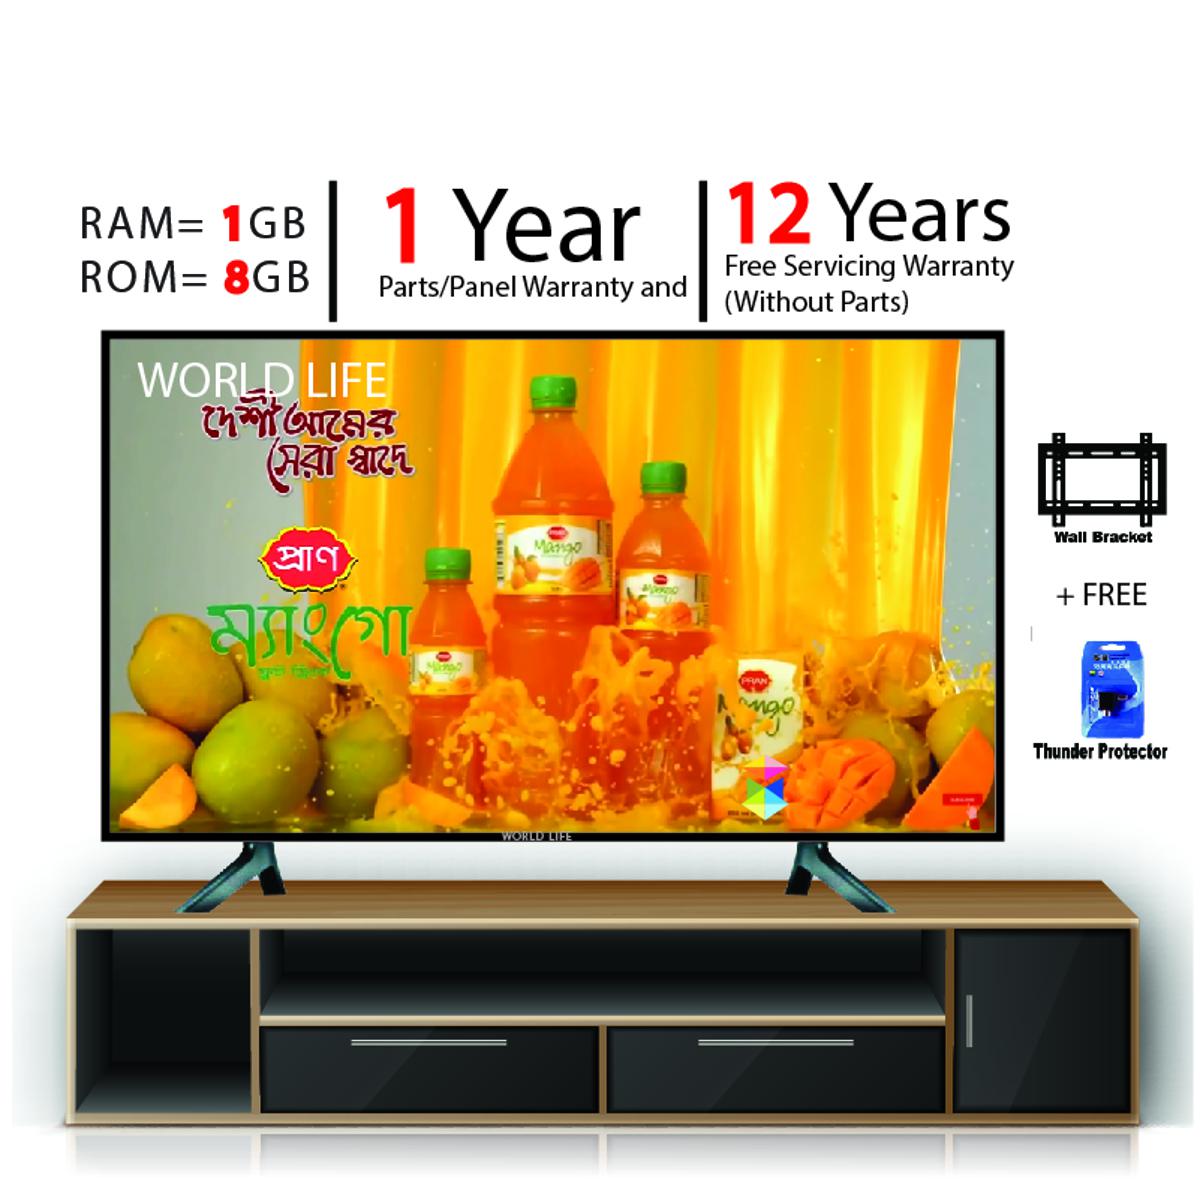 World Life 40 Inch Double Glass Android Smart Hd Led Tv 4k supported Ram 1 gb Rom 8 gb